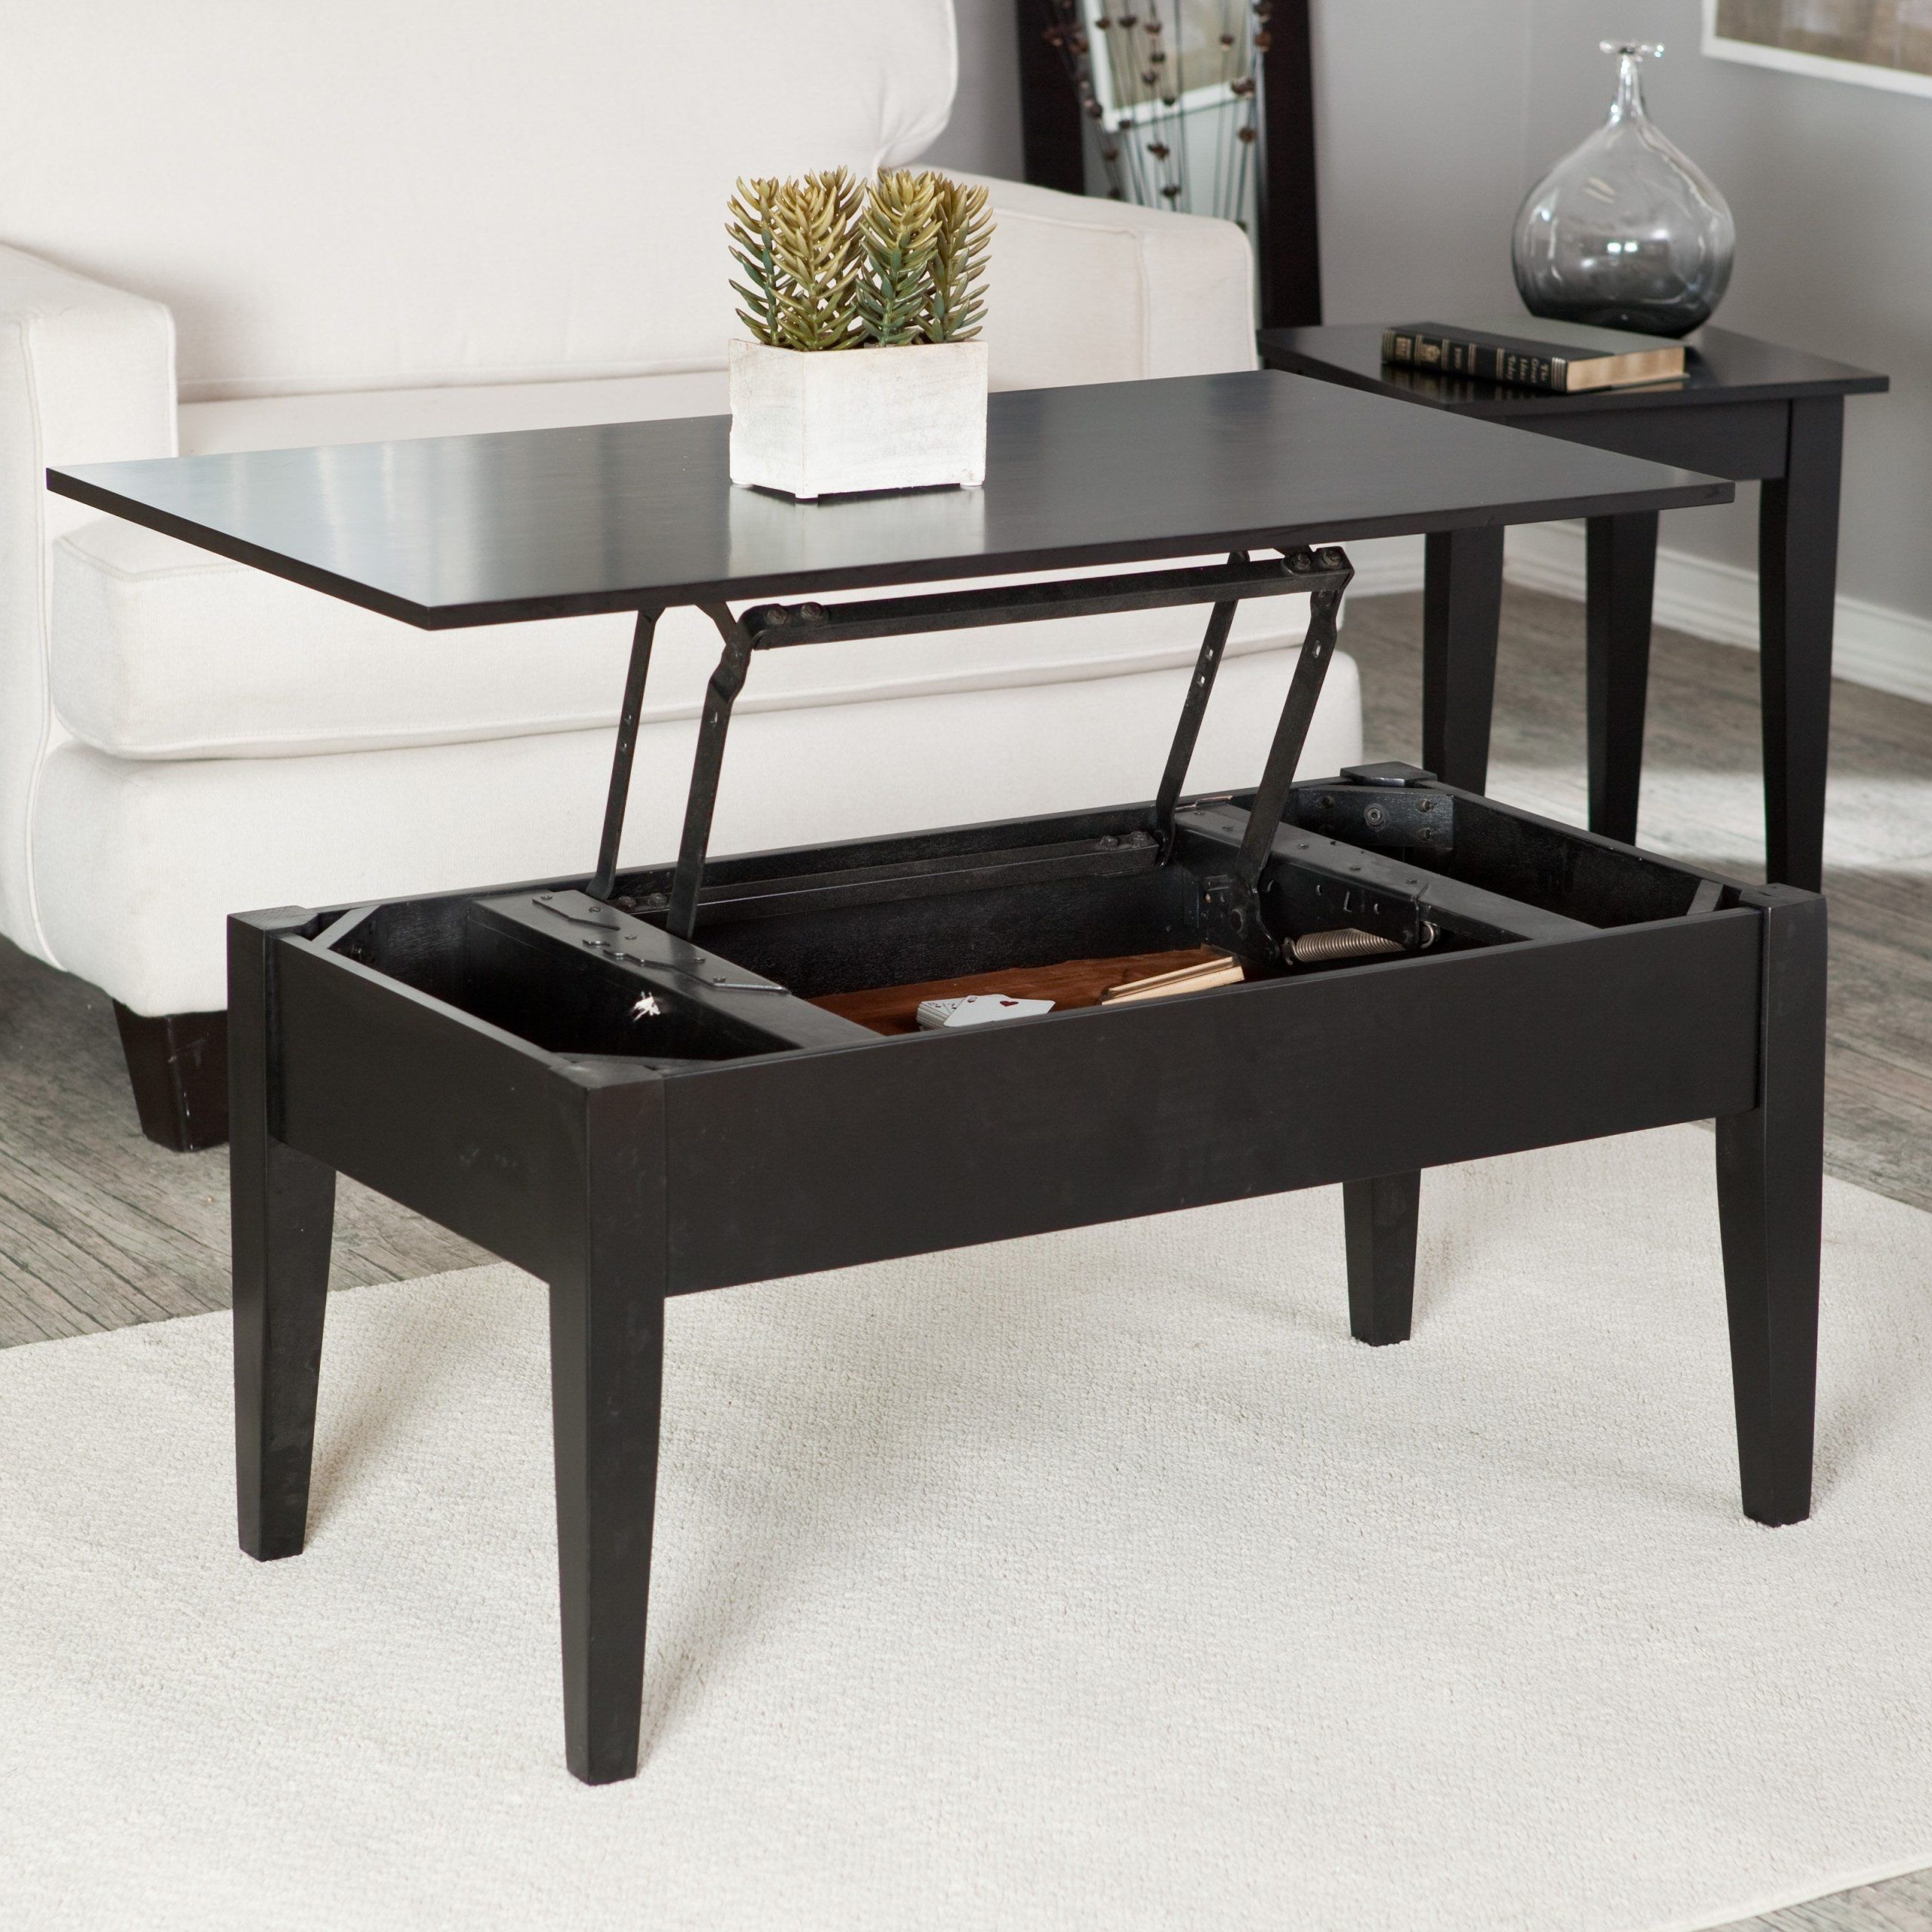 Coffee Table That Top Lifts Up | Black Coffee Tables, Coffee Table With High Gloss Lift Top Coffee Tables (View 18 of 21)